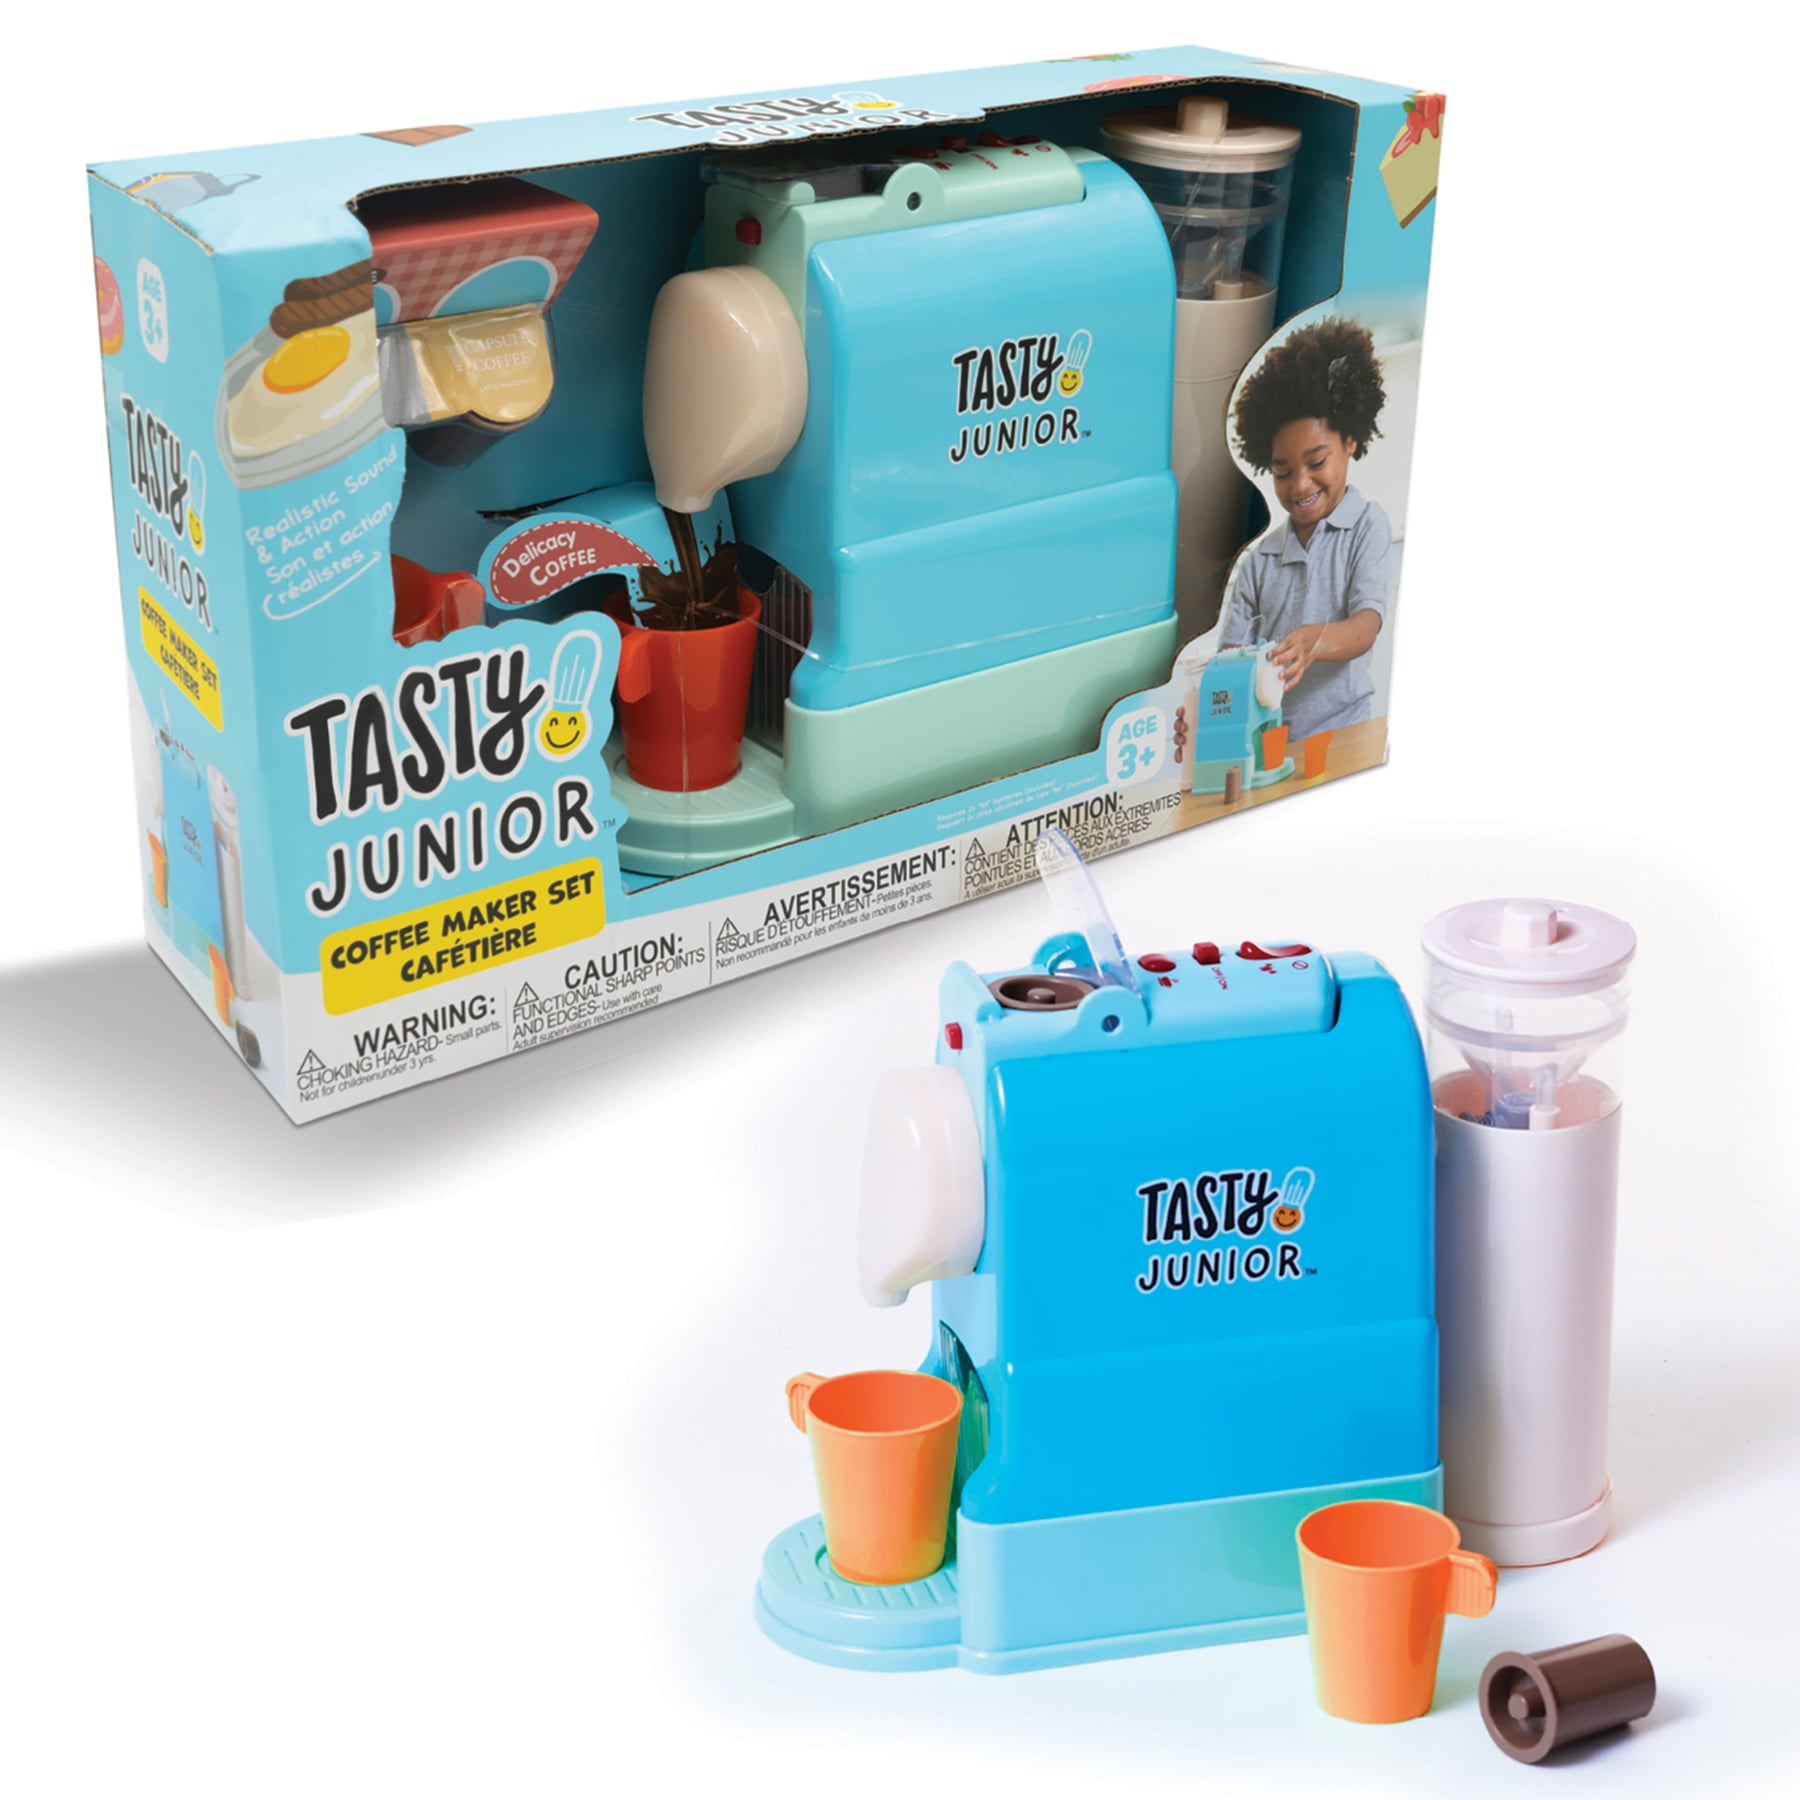  ﻿Playgo Toys Enterprises Ltd PlayGo My First Kitchen Appliances  Playset; Coffee Maker, Mix Master and Toaster Pretend Coffee Machine (Blue  Trio) Designed for Kids Ages 3+ Years : Toys & Games